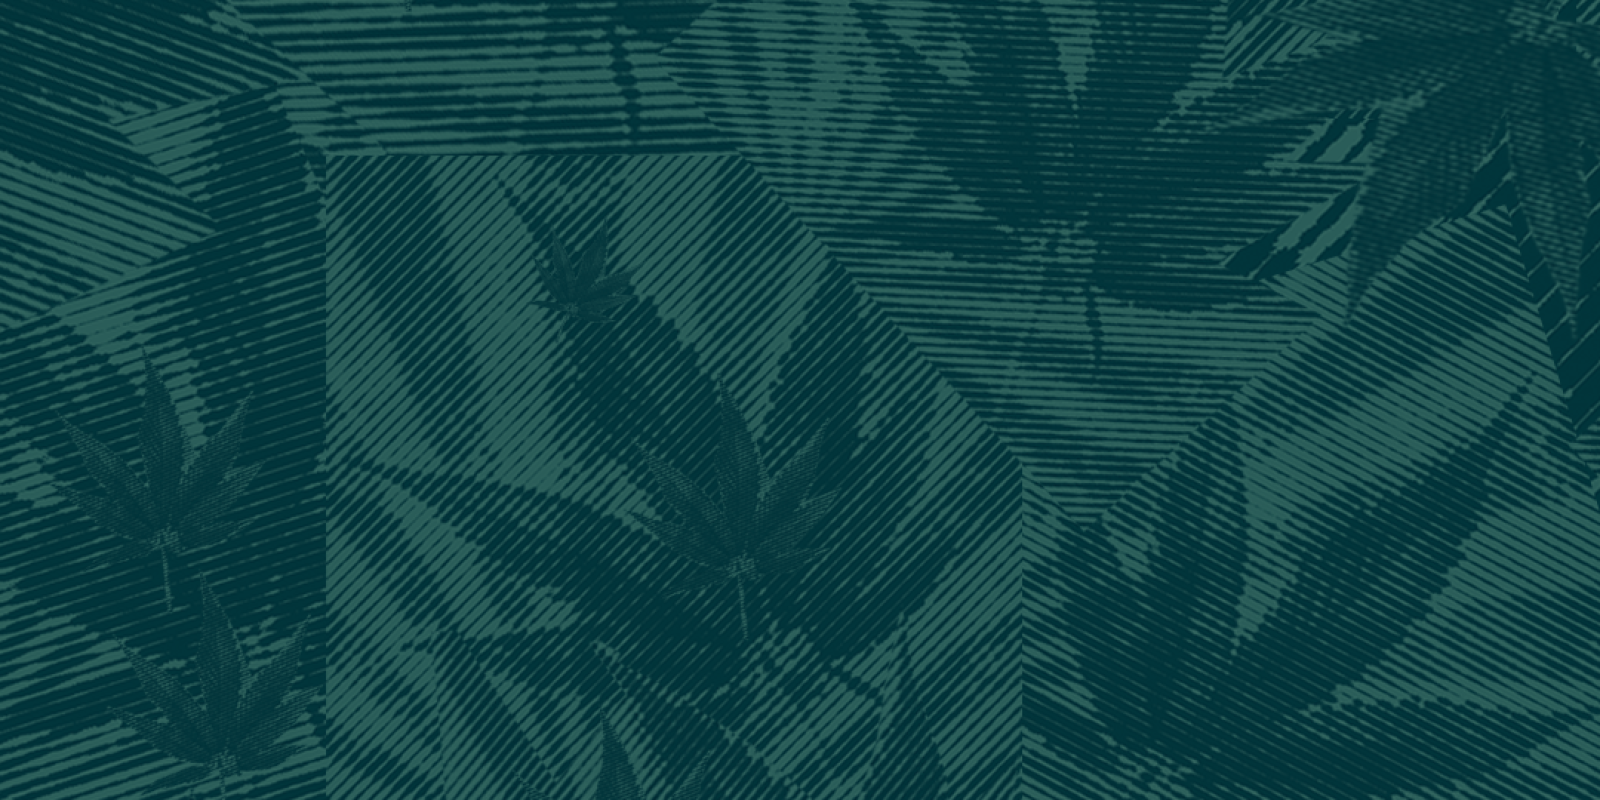 Collage of marijuana leaves and an abstract background. There is a dark green filter layer over all of the leaves.